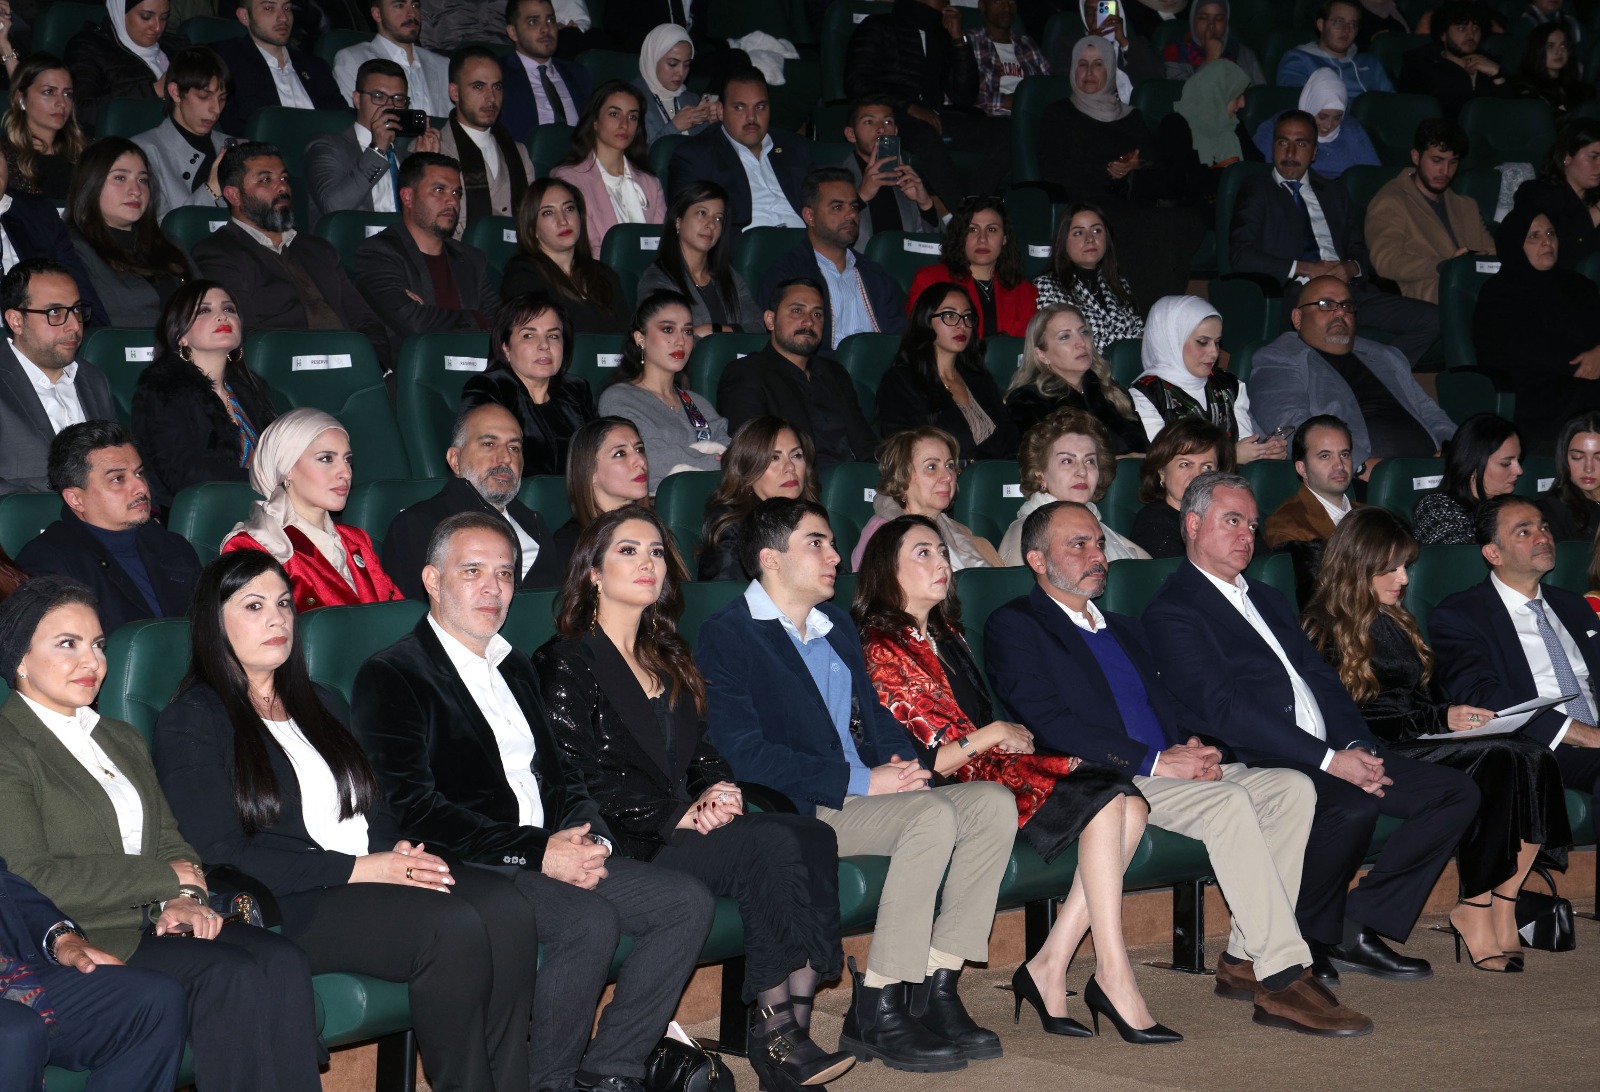 Prince Ali patronizes youth empowerment film, song award ceremony